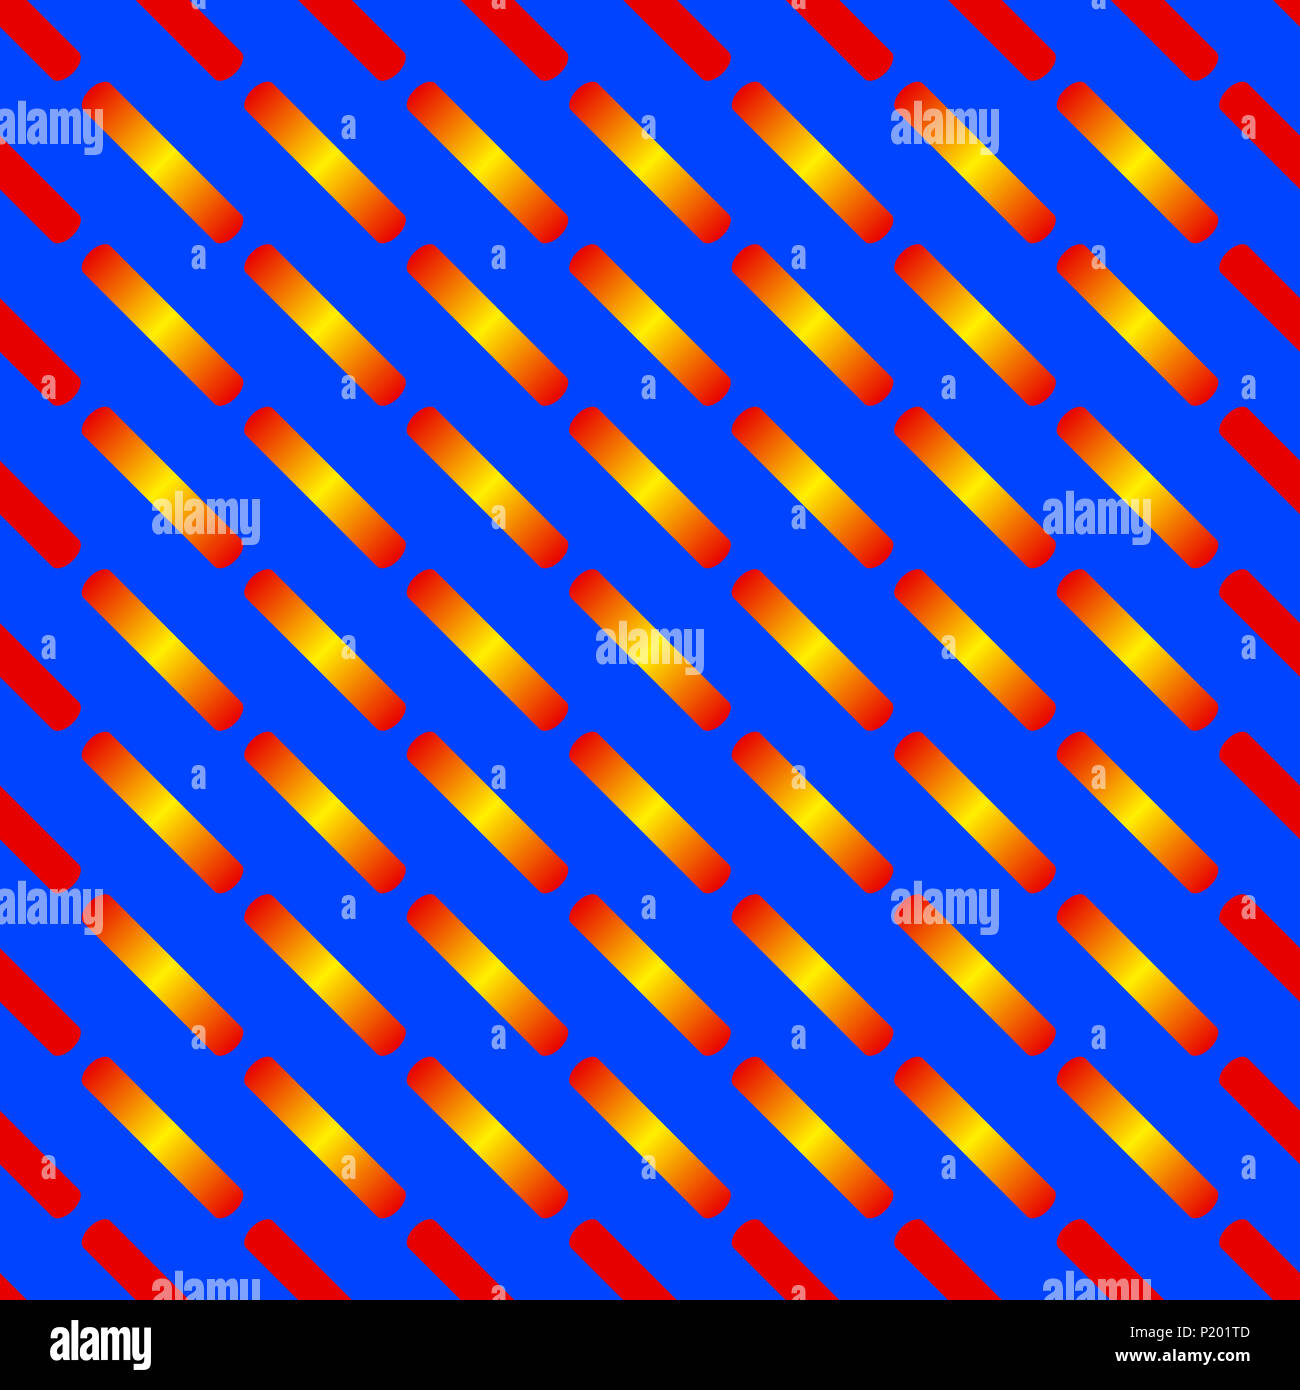 Abstract seamless colorful pattern of diagonal bars in gradient red, orange, and yellow colors on blue background. Vector illustration, EPS 10. Stock Photo